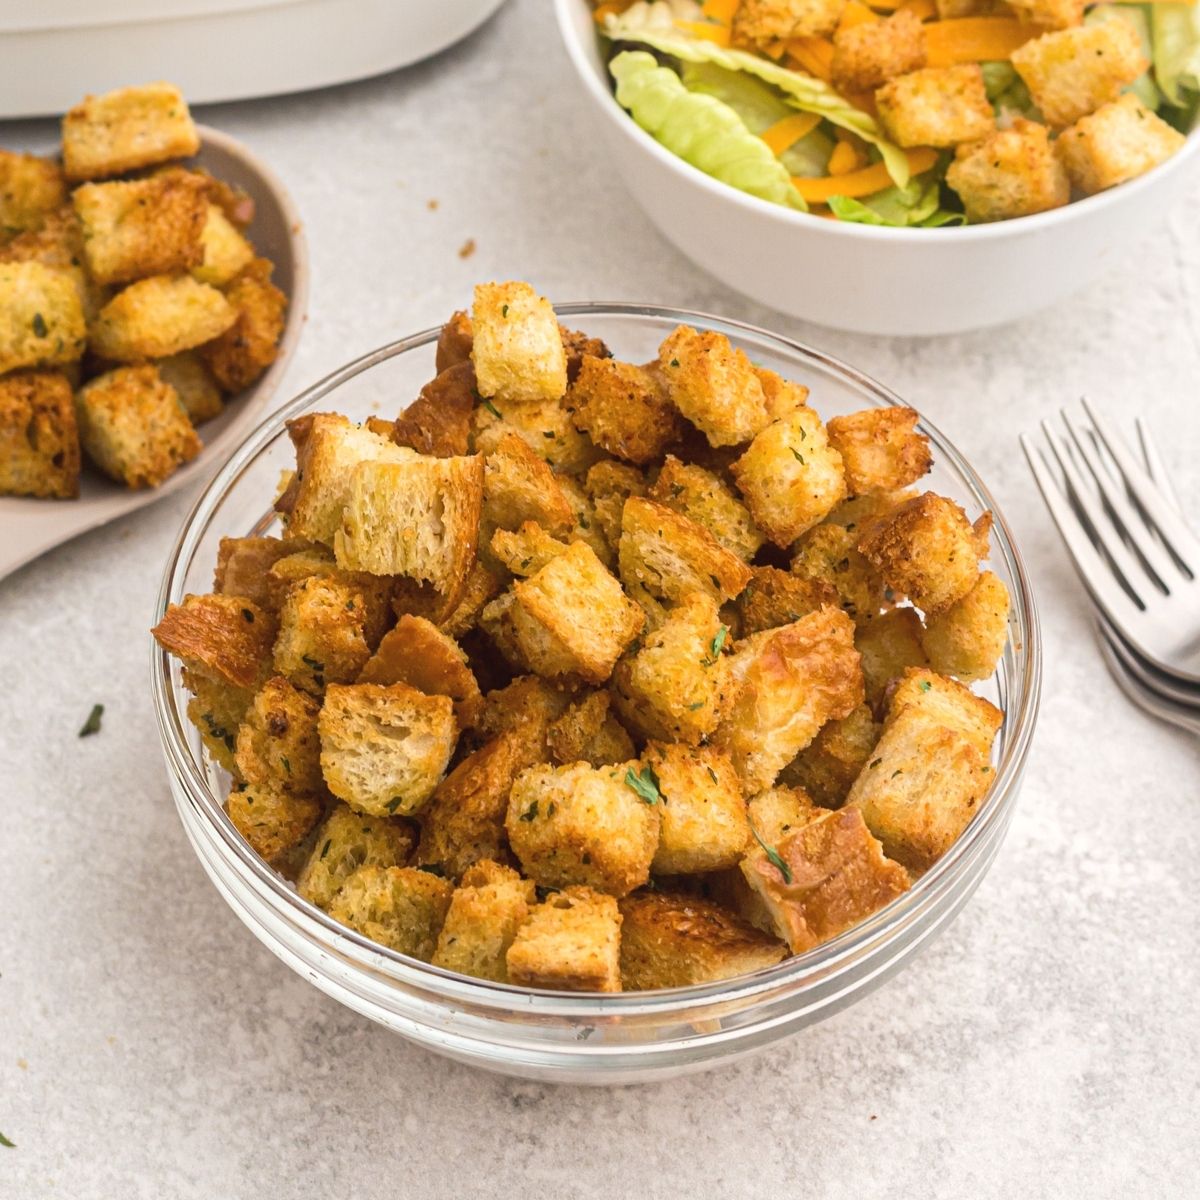 Clear glass bowl of golden croutons in front of a bowl of salad